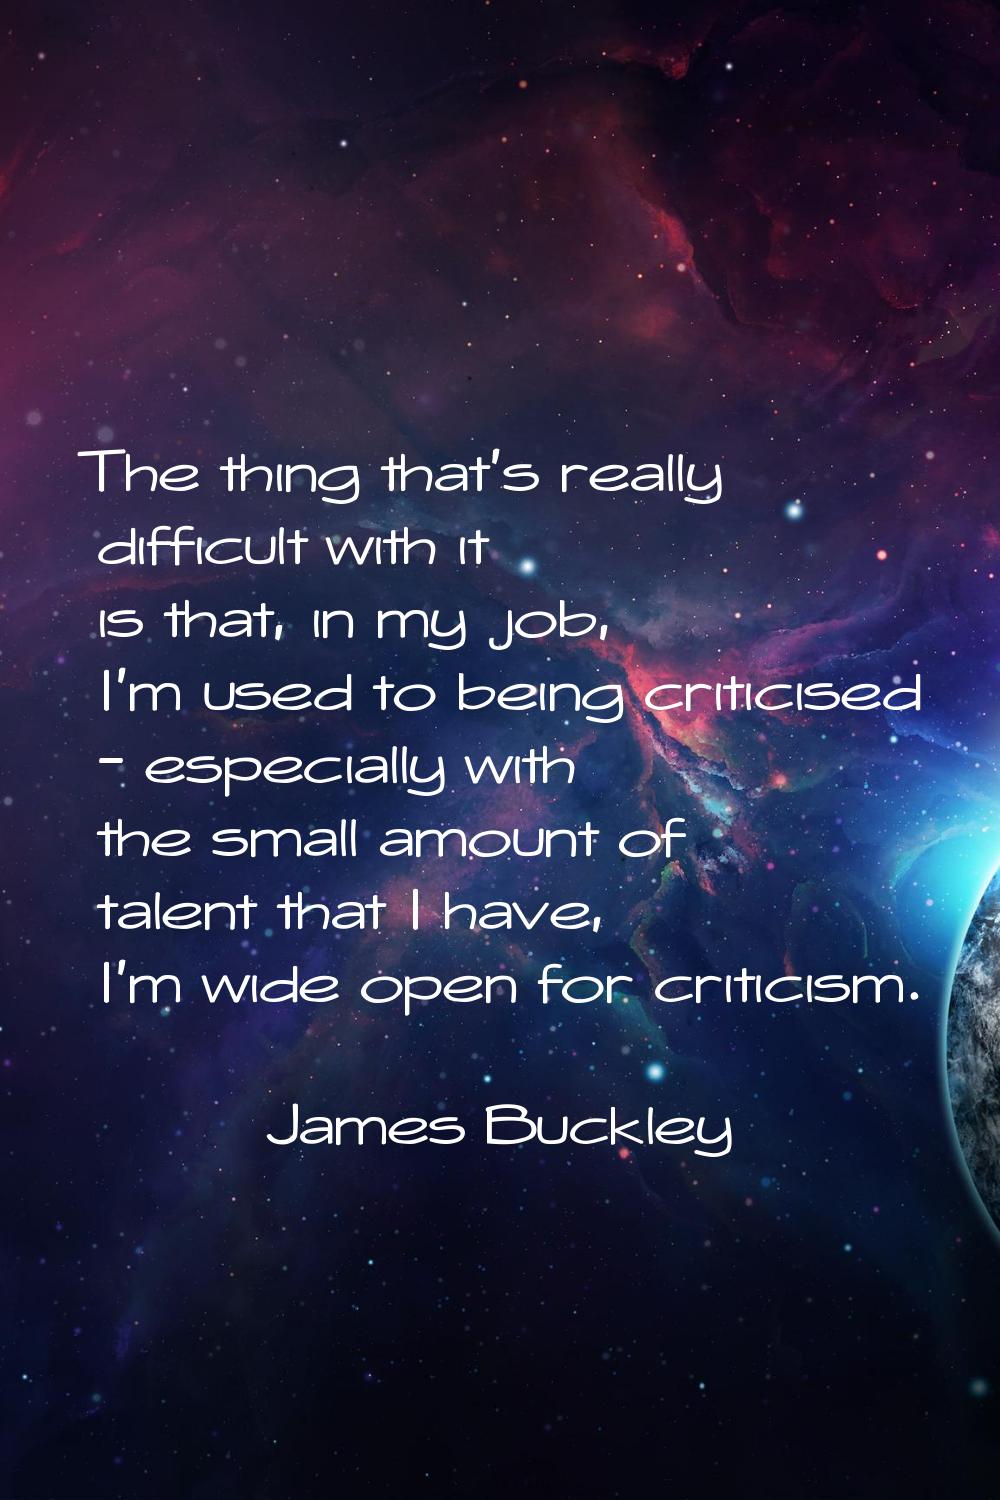 The thing that's really difficult with it is that, in my job, I'm used to being criticised - especi